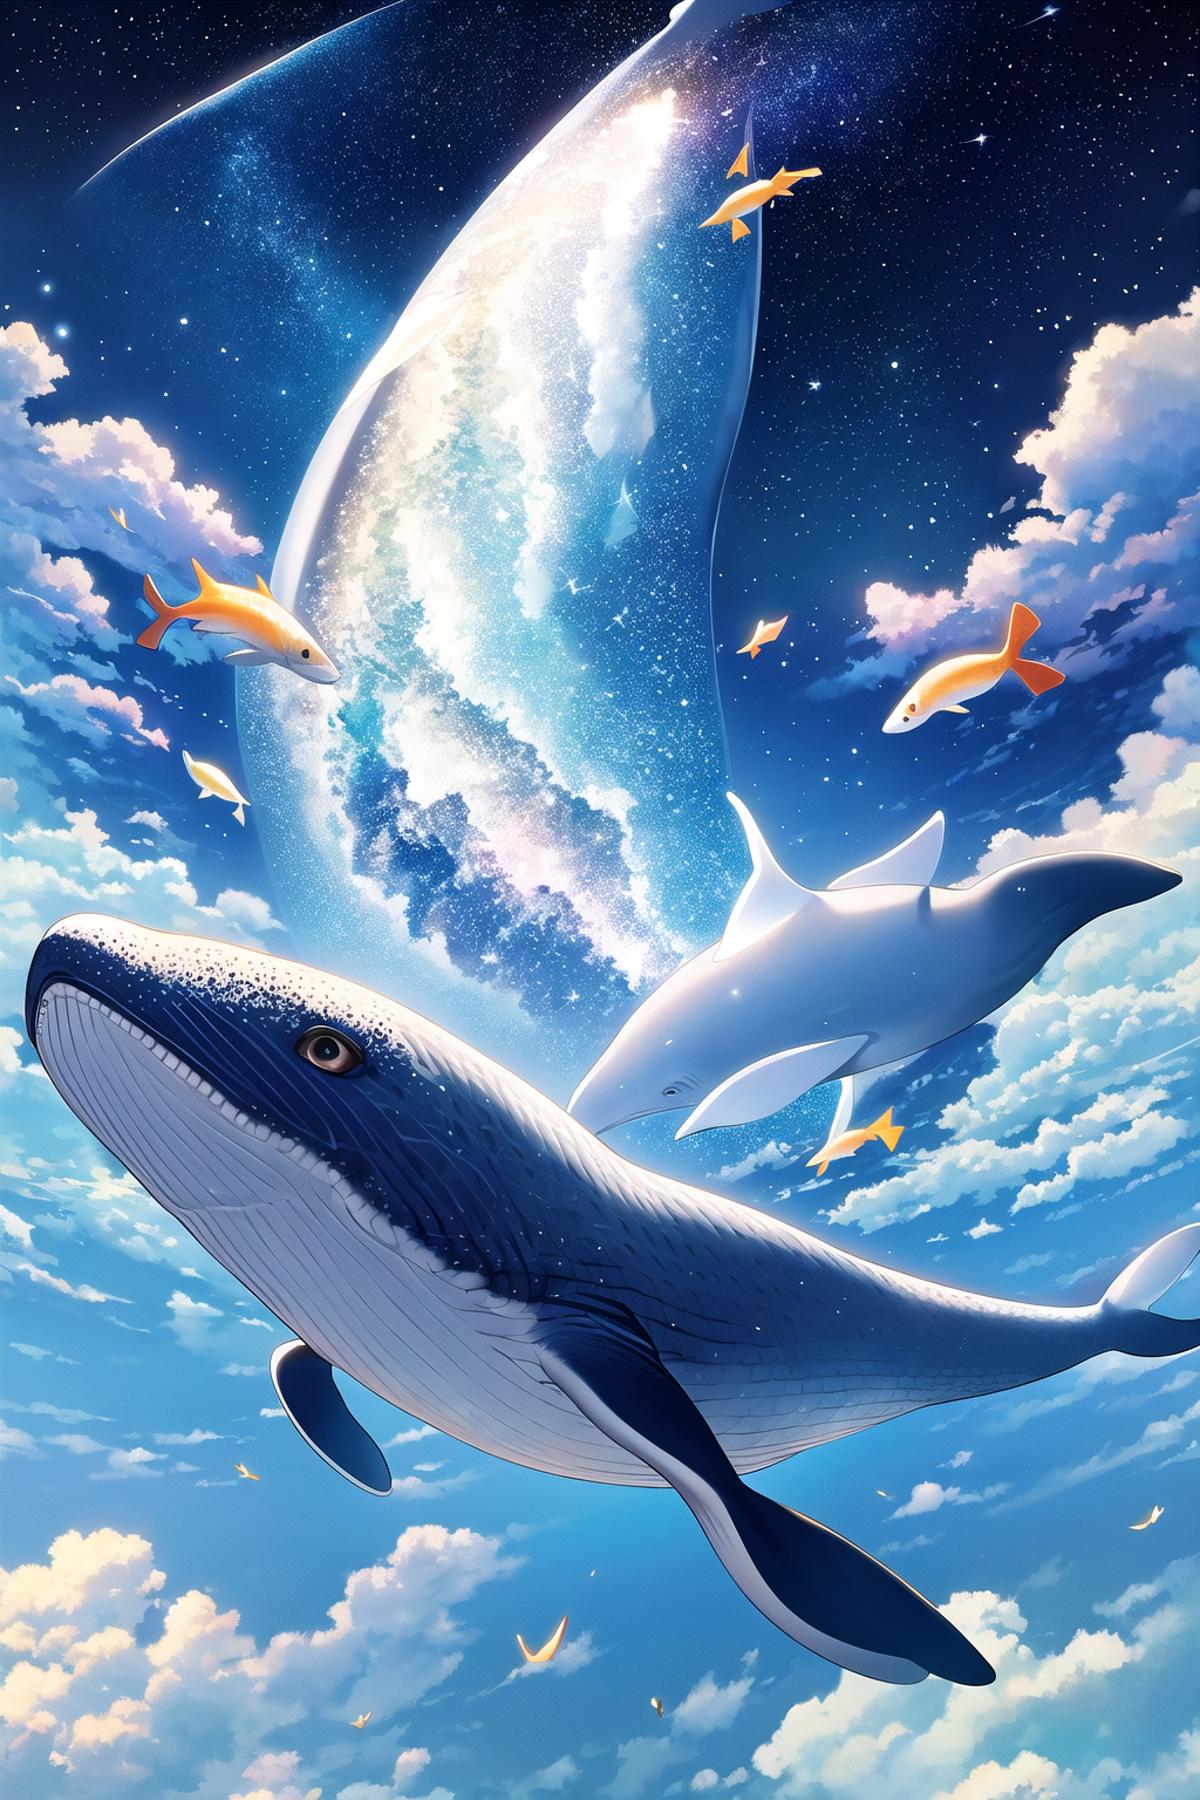 Blue and white whale and fish in a blue sky with clouds.